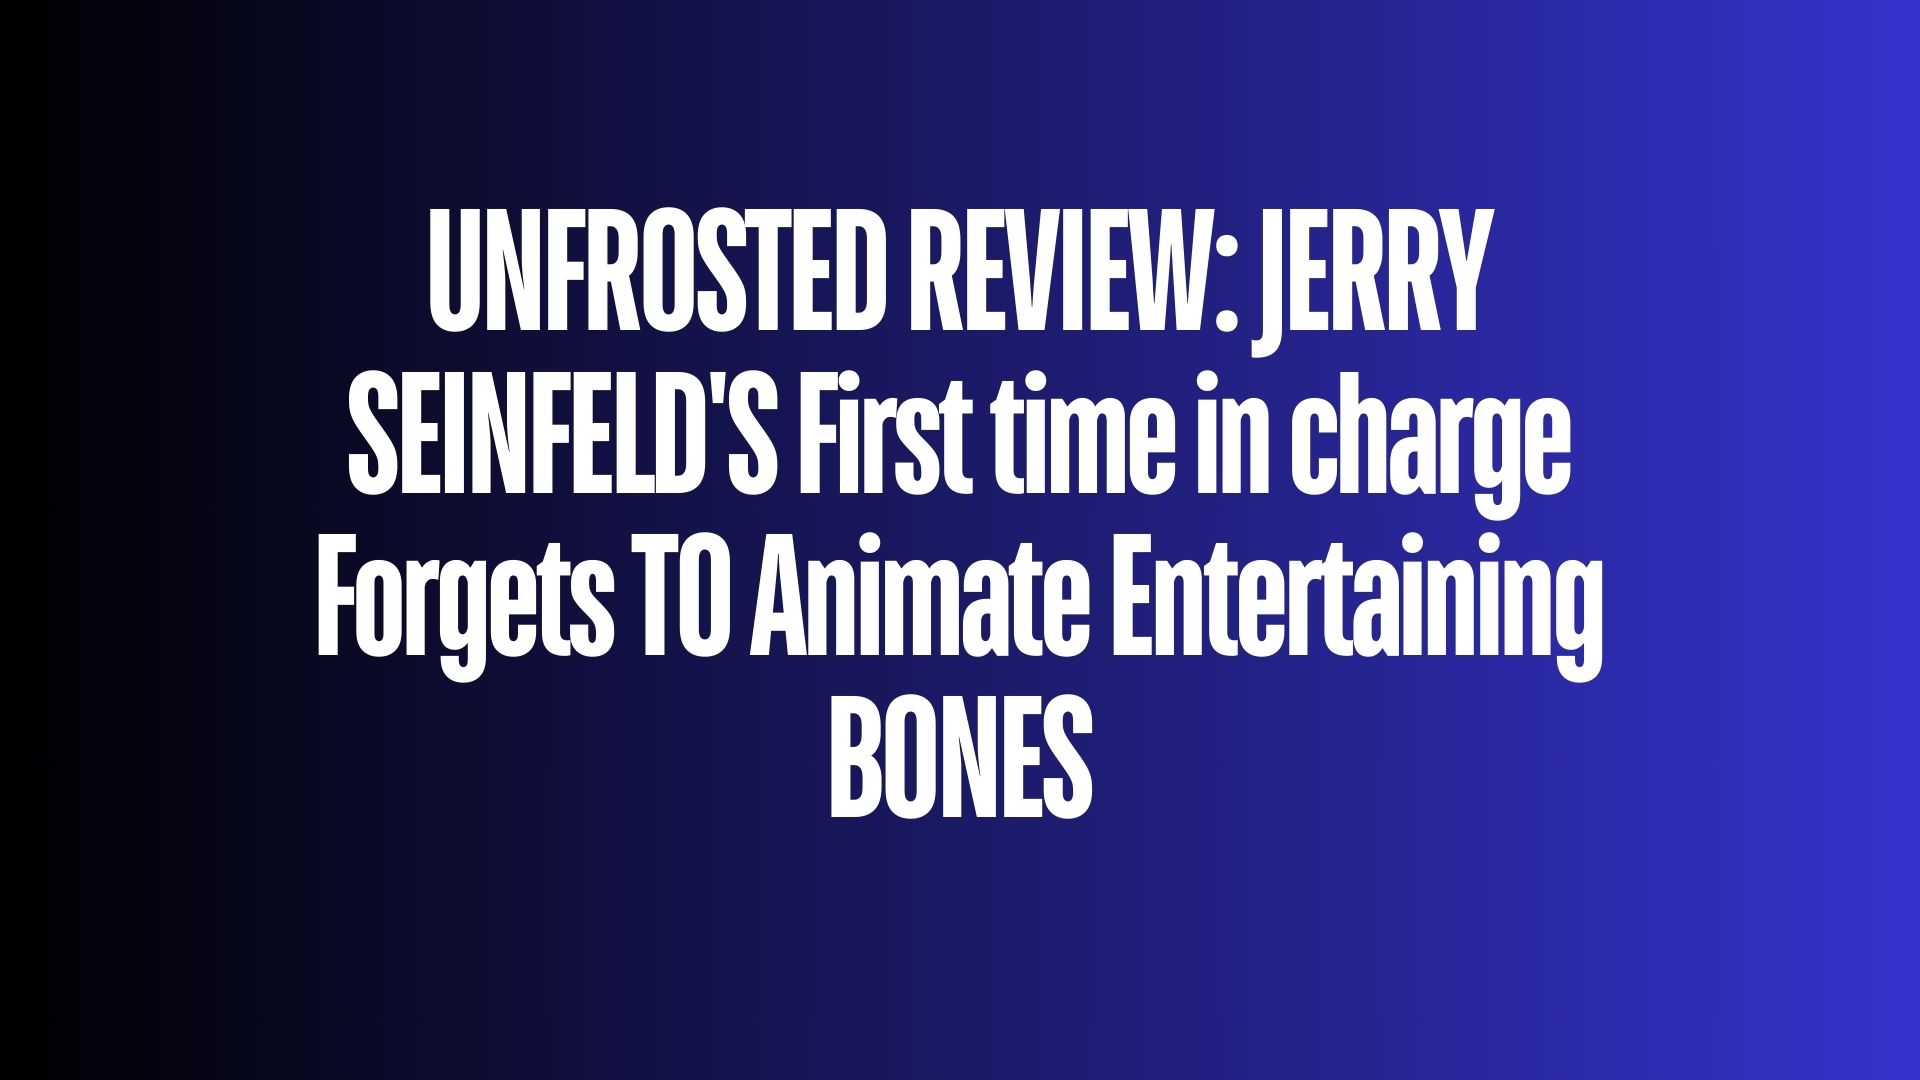 UNFROSTED REVIEW JERRY SEINFELD’S First time in charge Forgets TO Animate Entertaining BONES